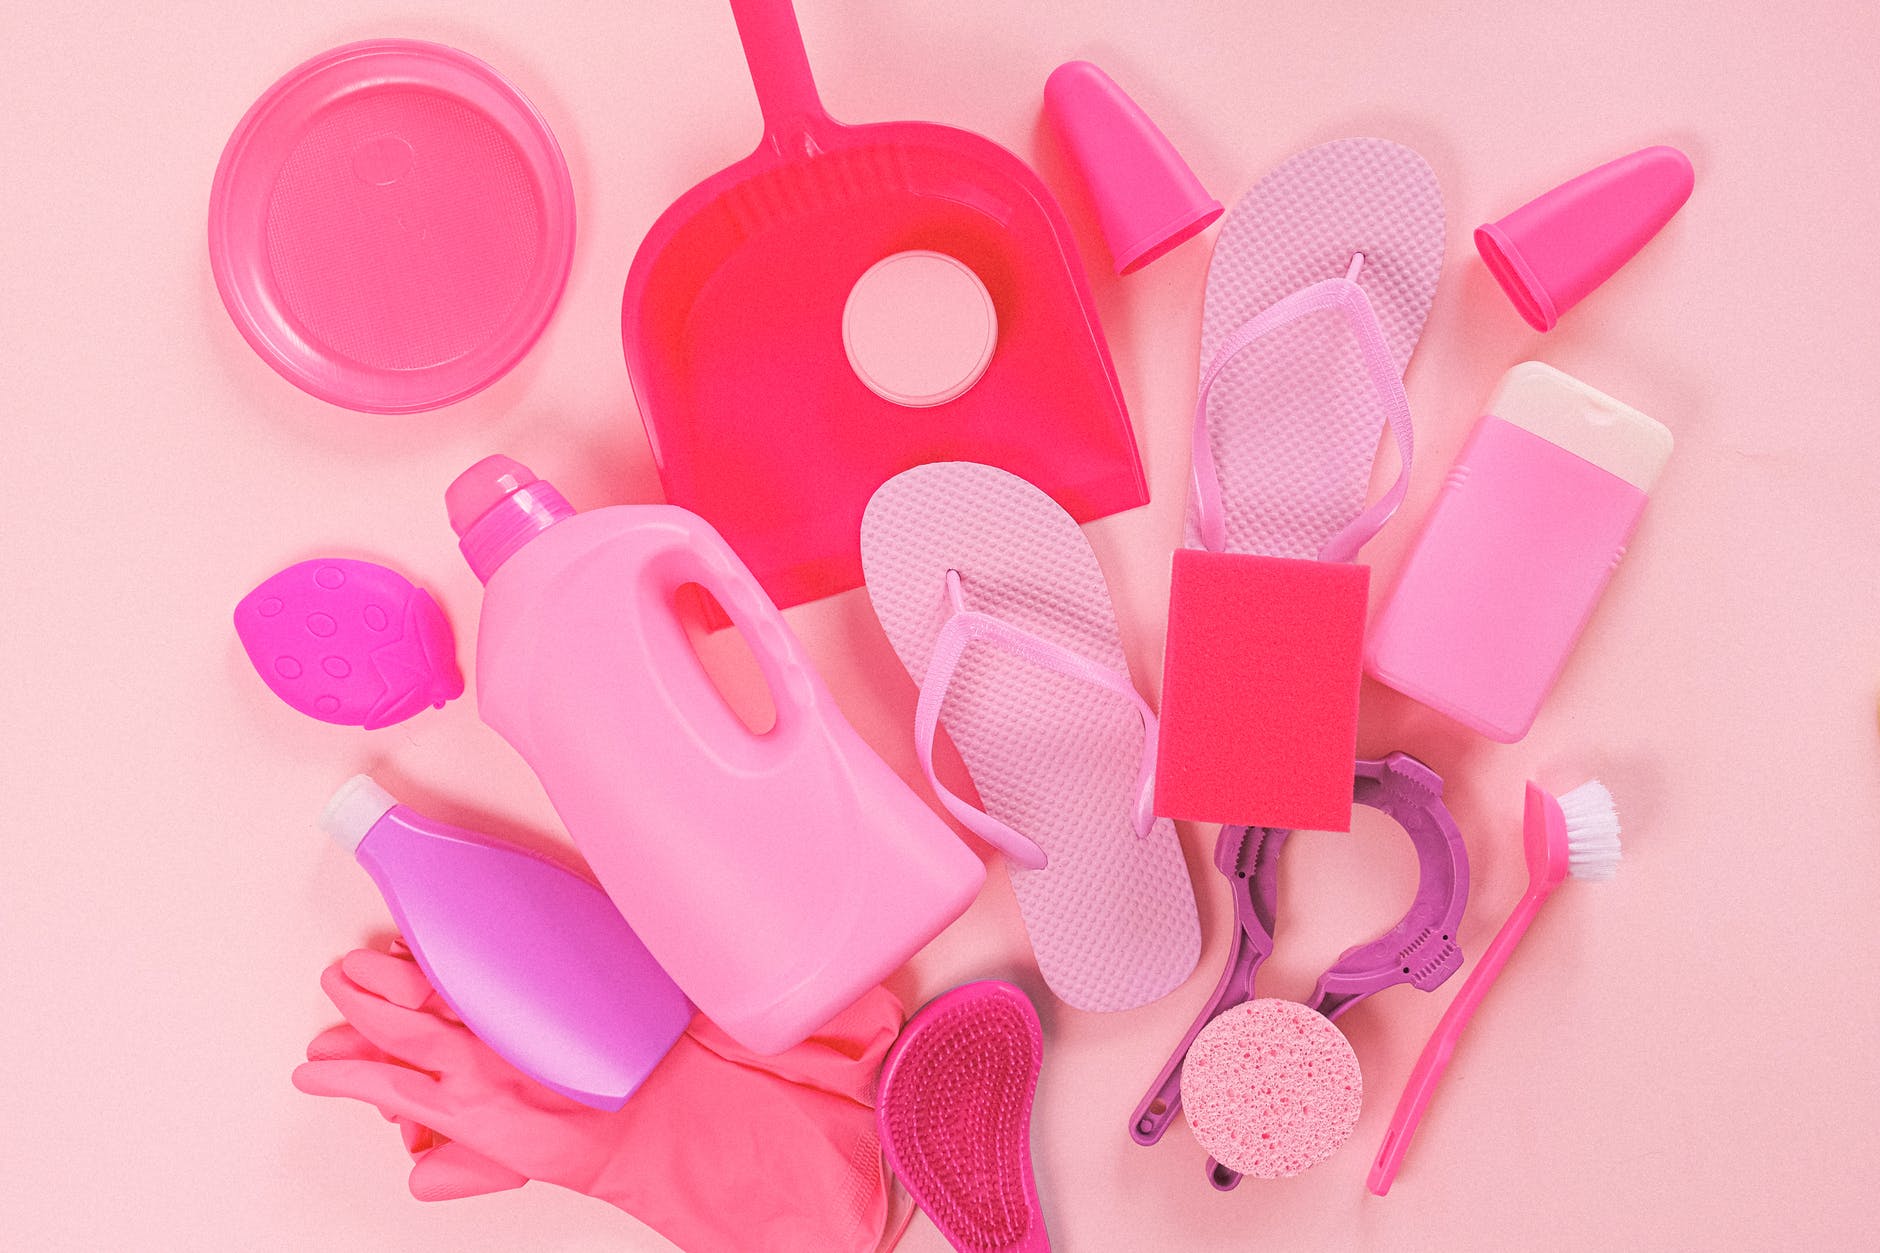 set of cleaning supplies on pink background